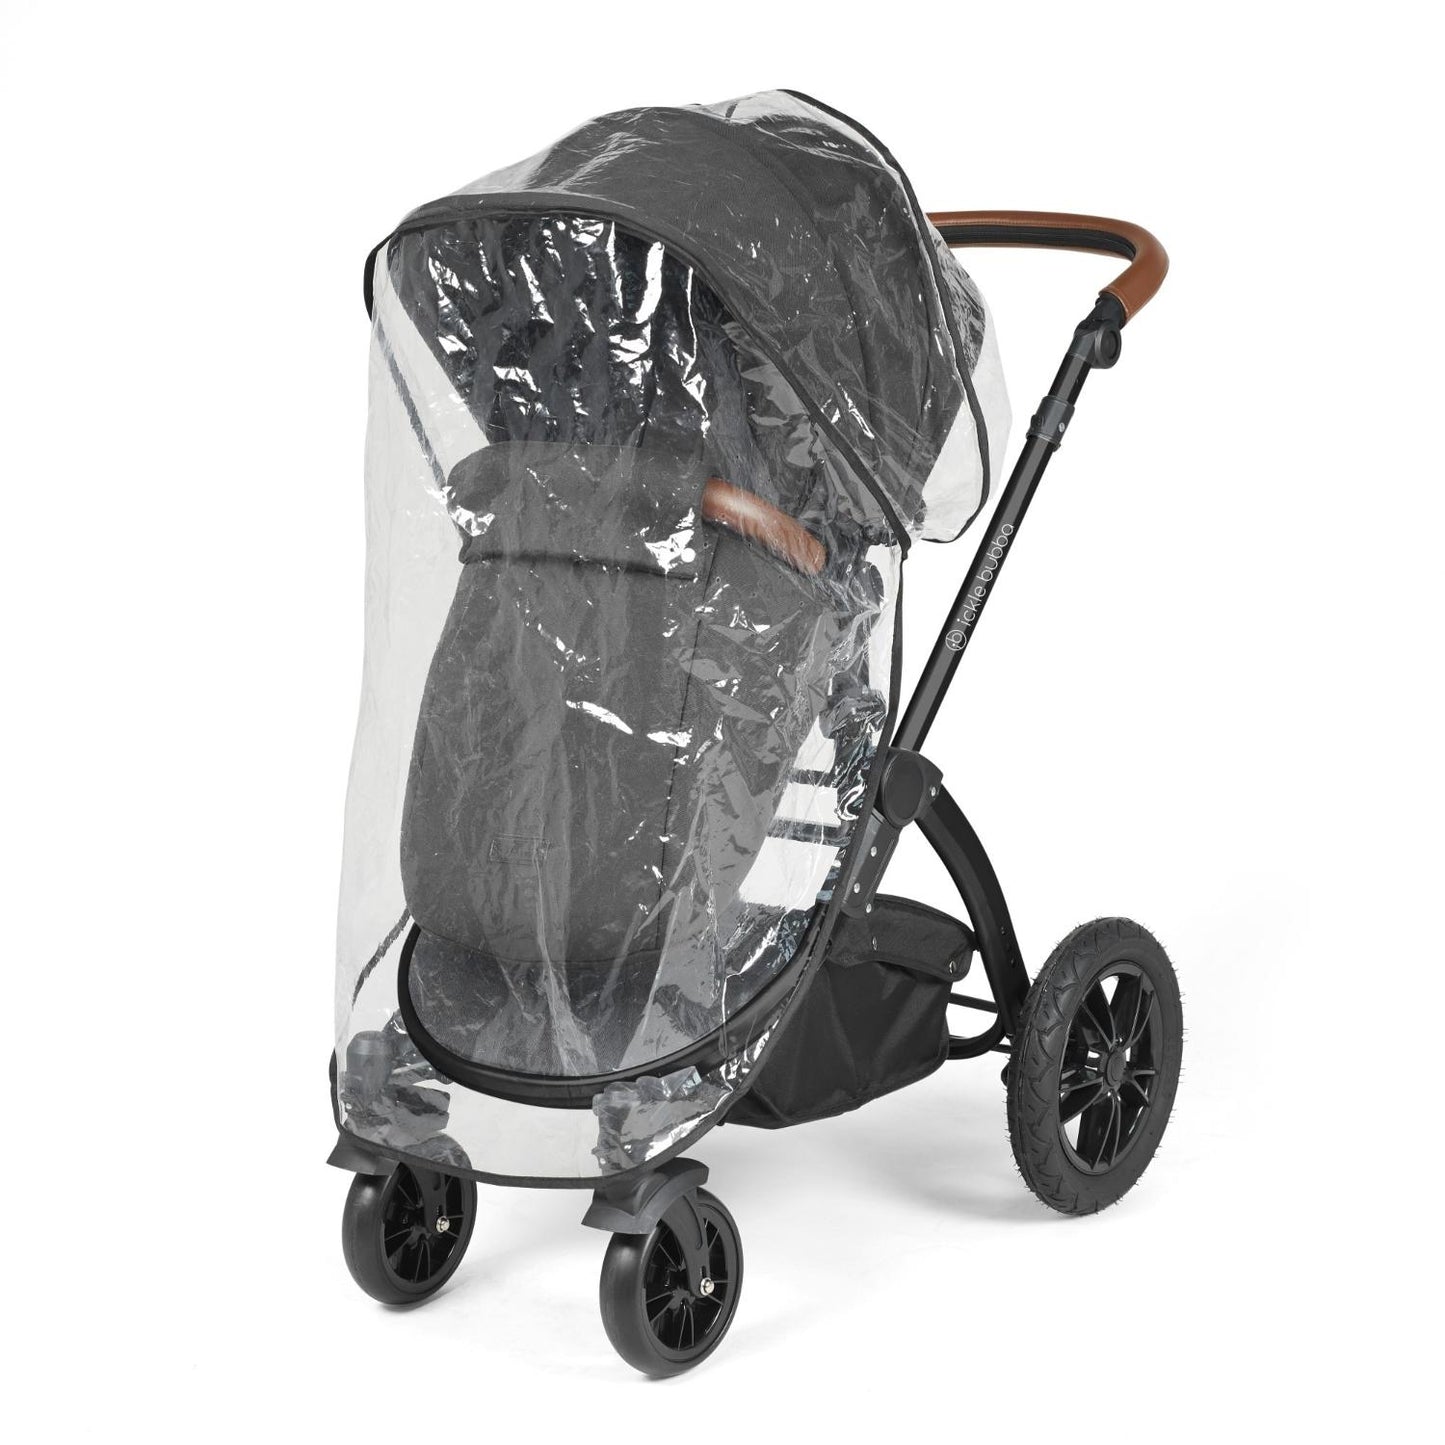 Rain cover placed on an Ickle Bubba Stomp Luxe Pushchair in Charcoal Grey colour with tan handle